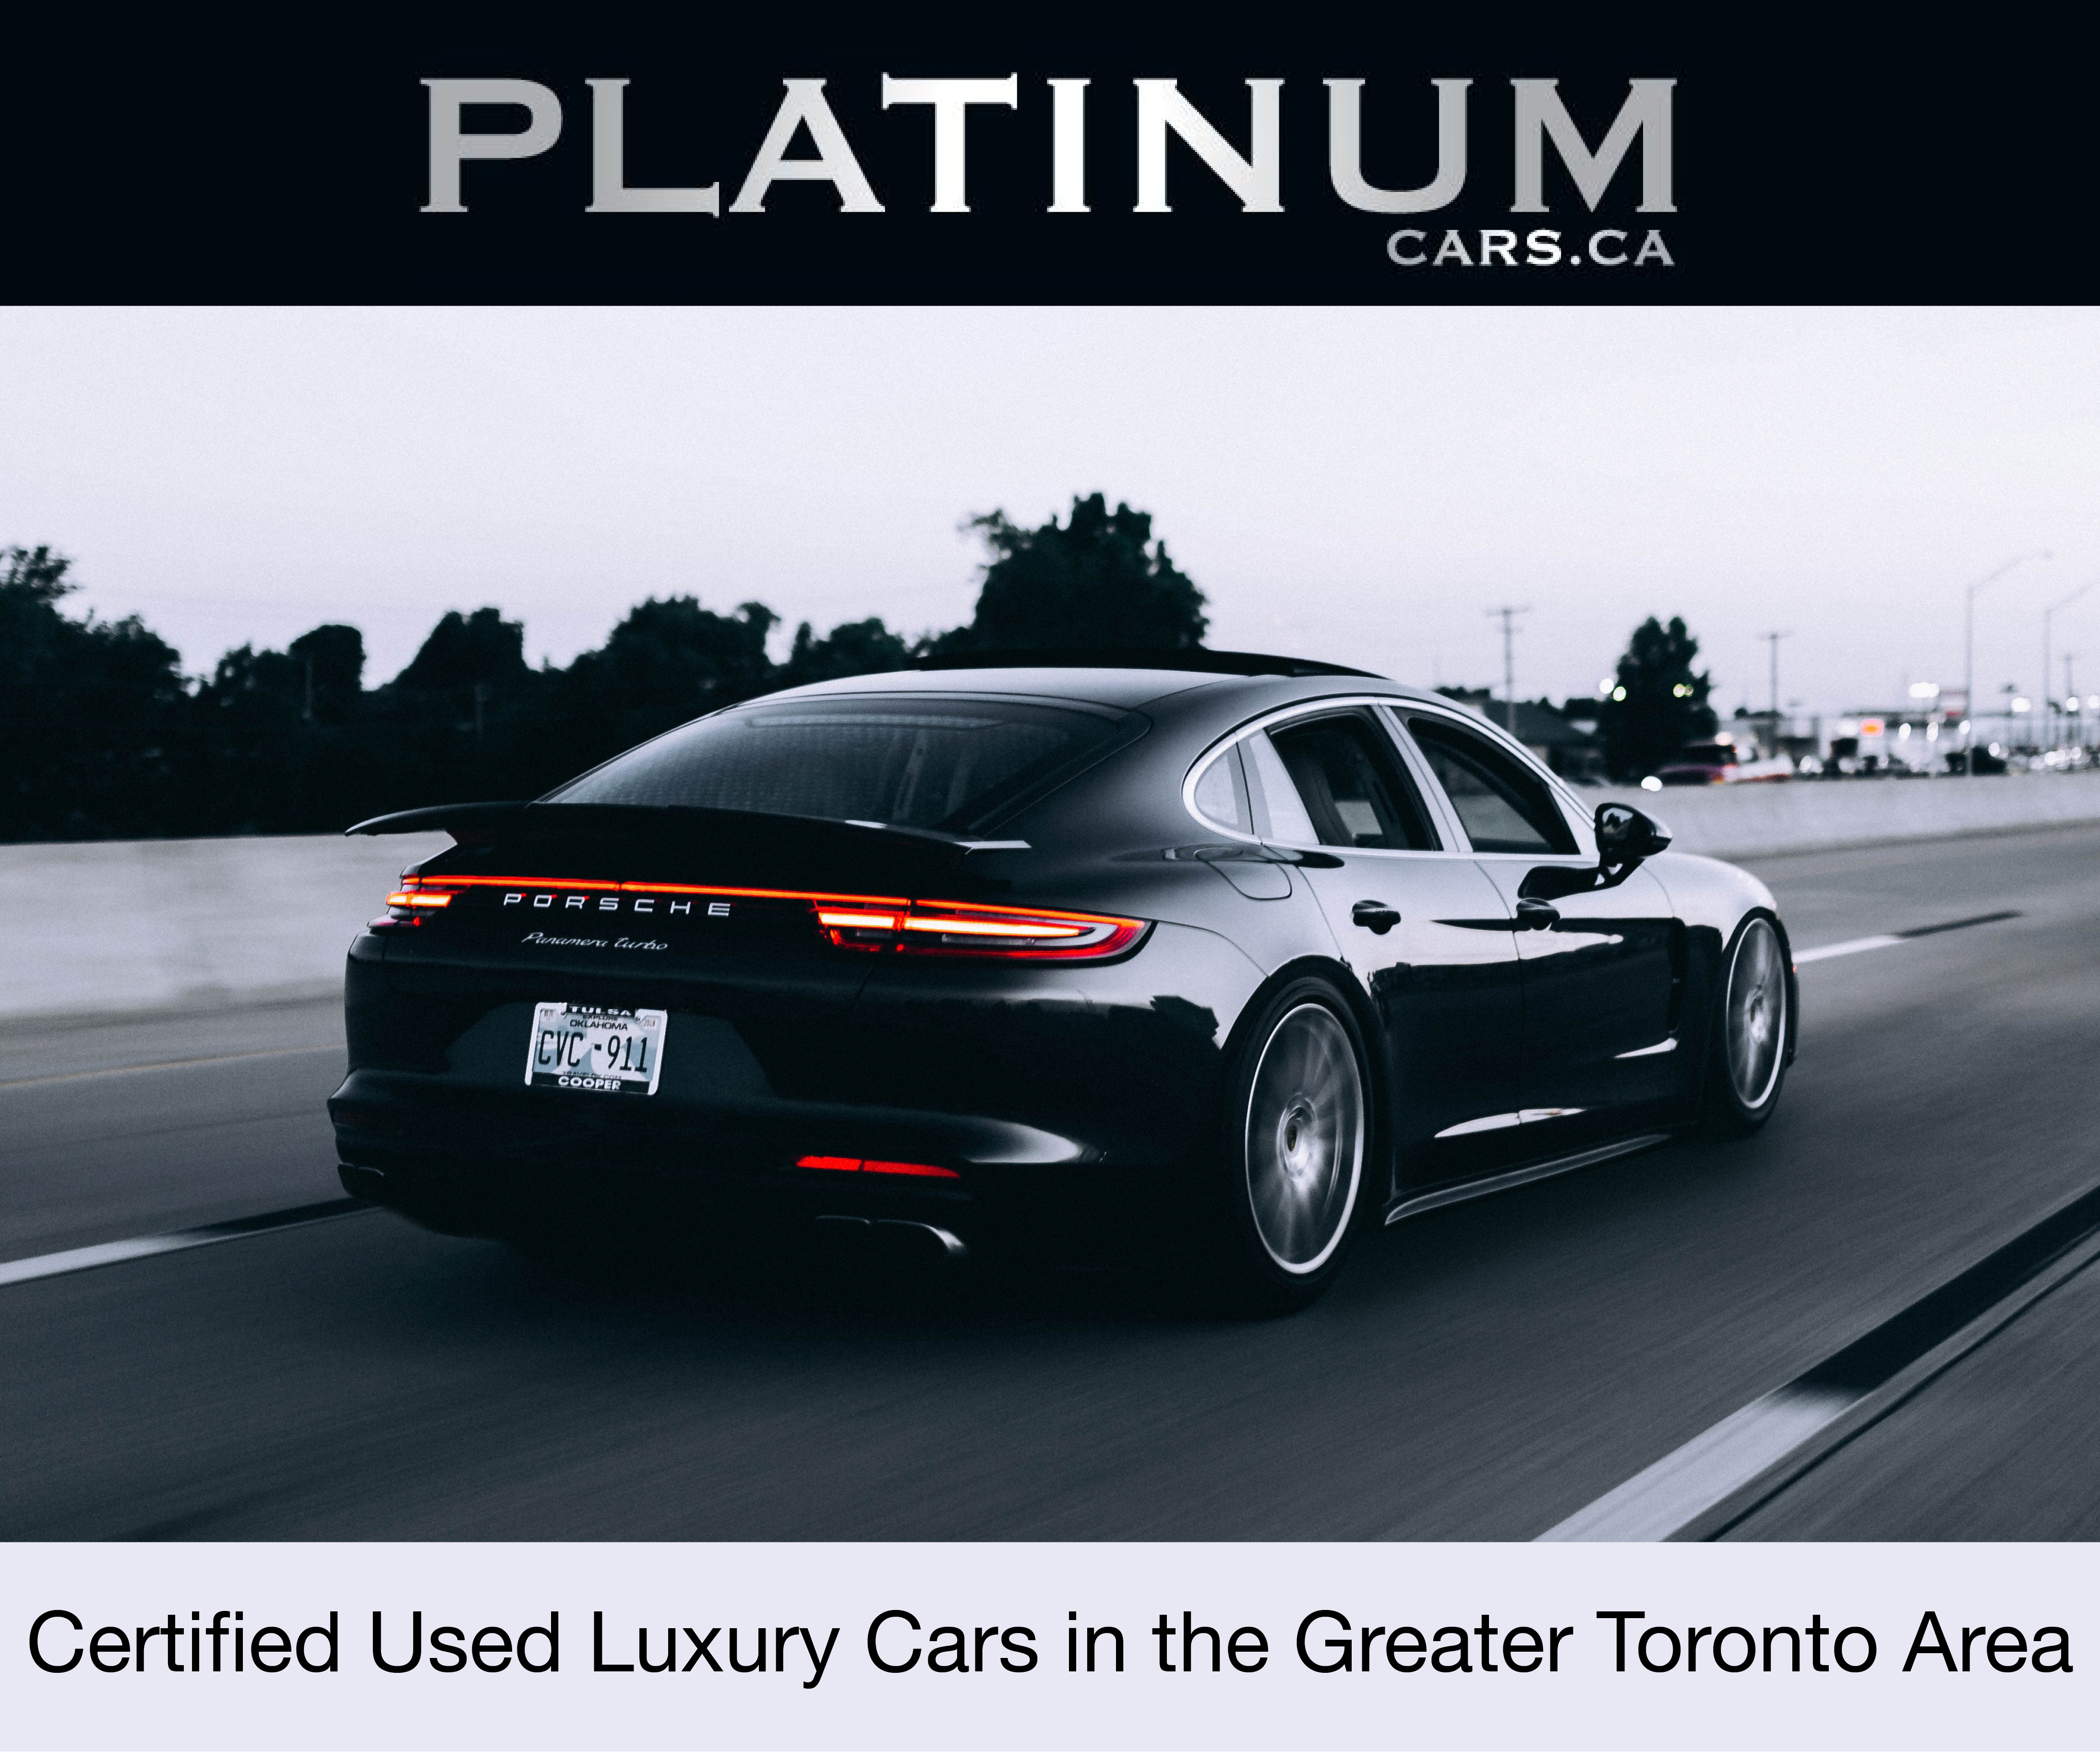 More from Platinum Cars